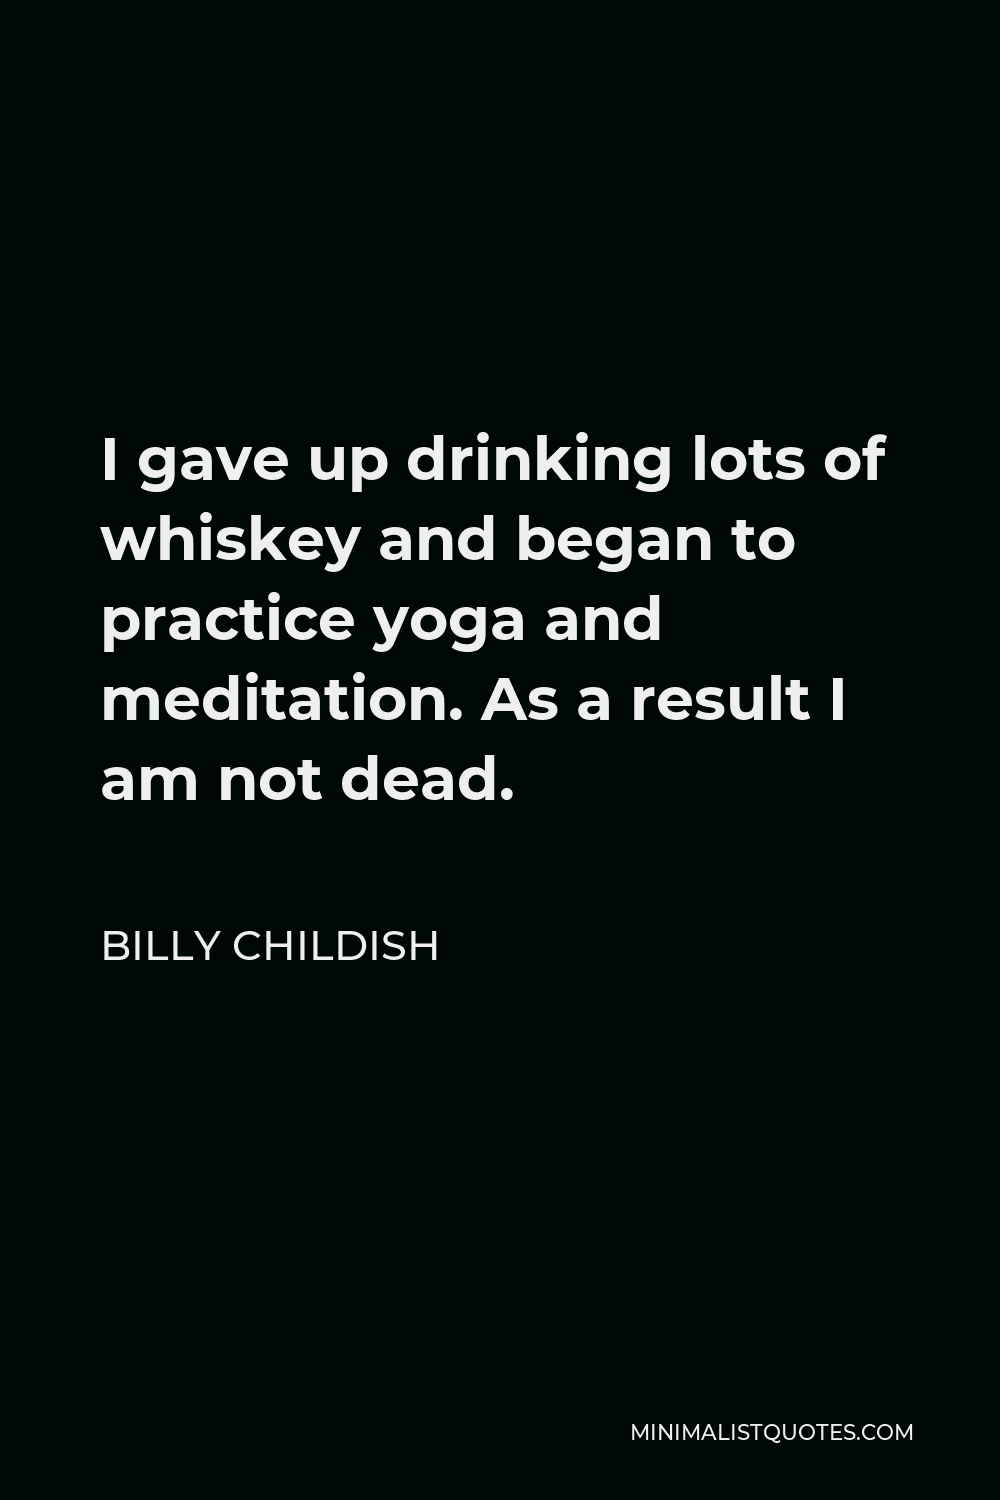 Billy Childish Quote - I gave up drinking lots of whiskey and began to practice yoga and meditation. As a result I am not dead.